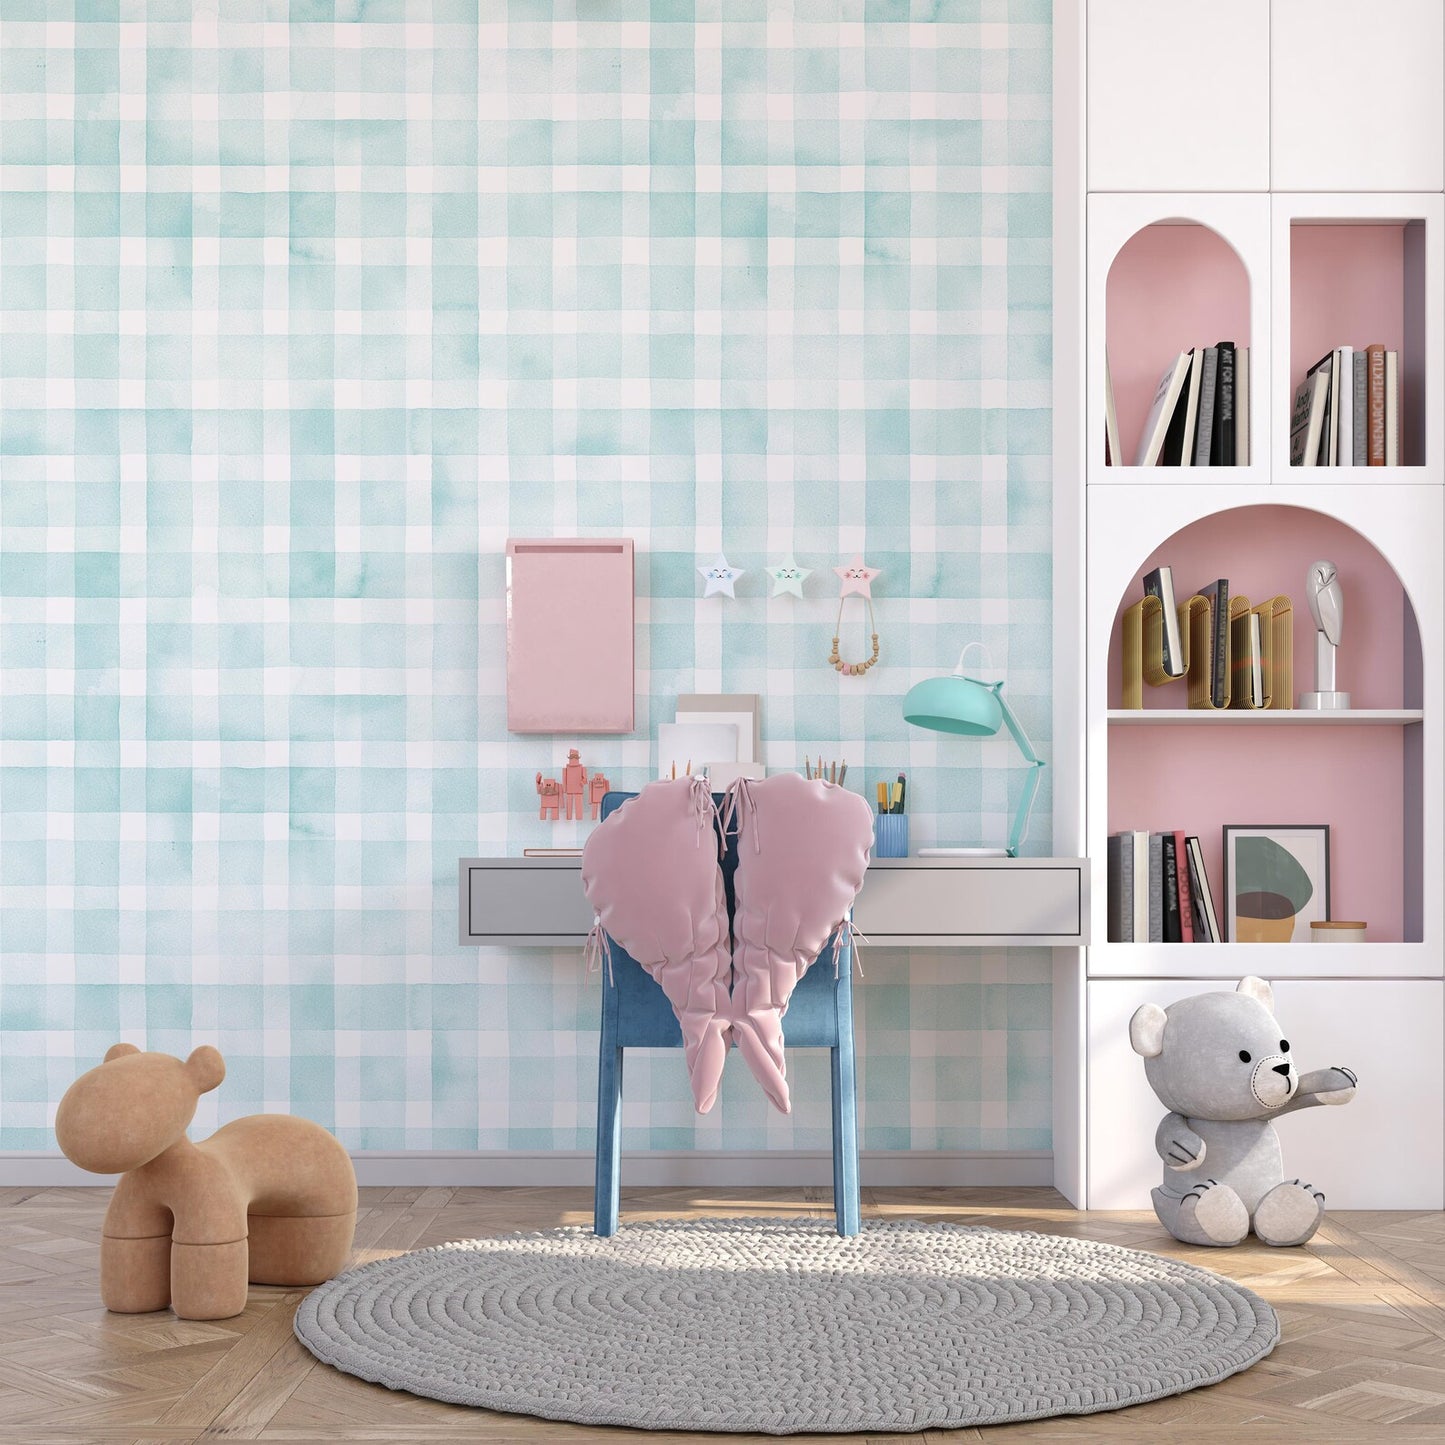 Light Blue Gingham Check Watercolor Peel and Stick Wallpaper for Kids Room and Nursery